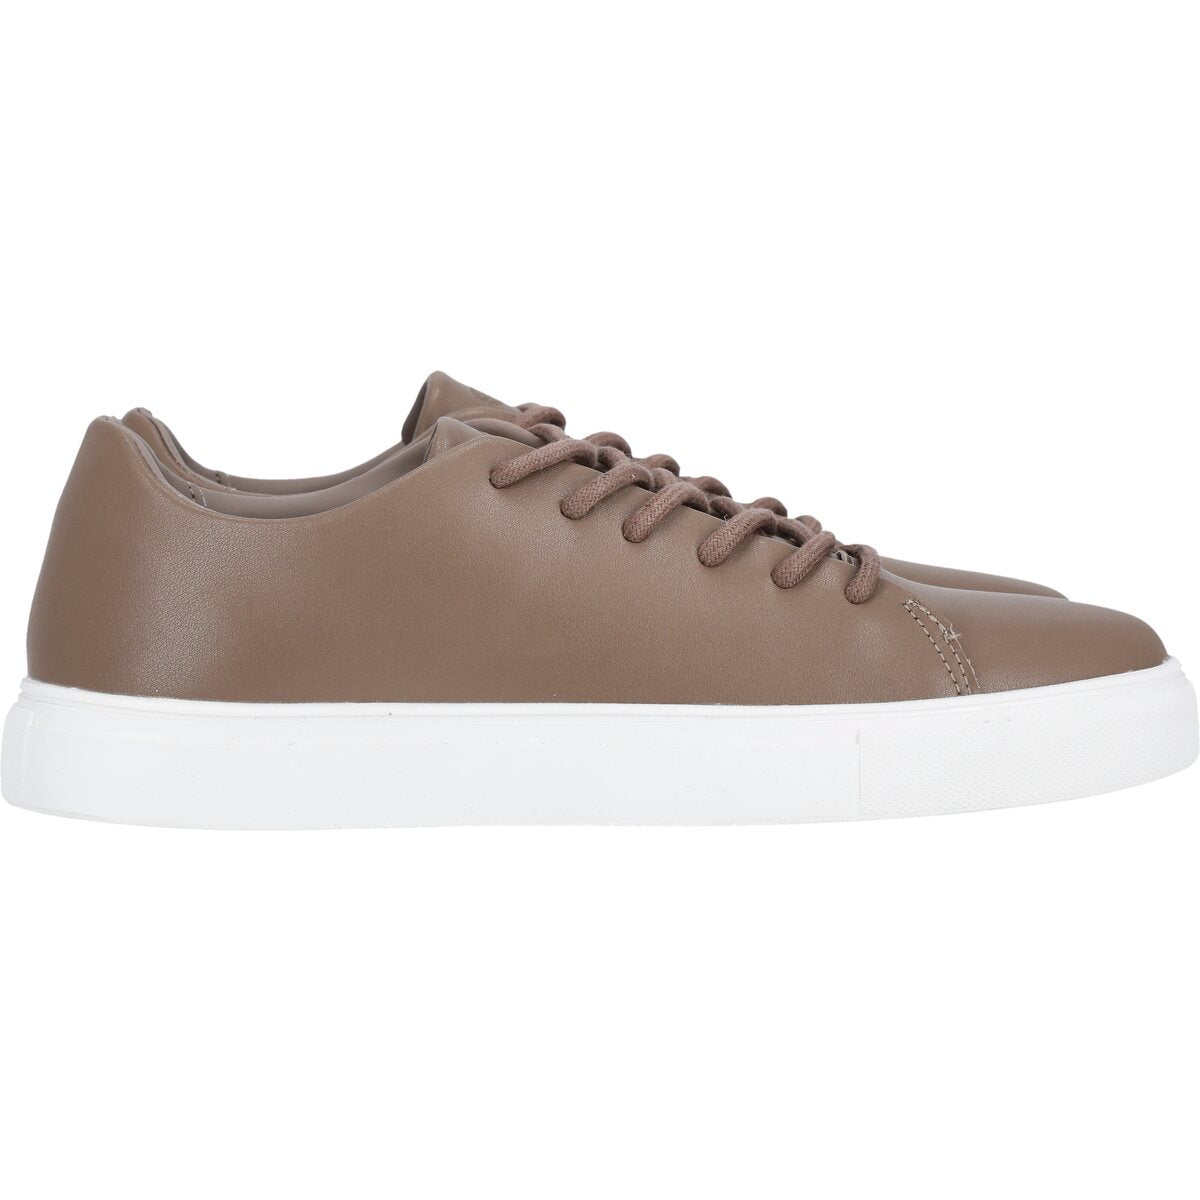 Athlecia Christinia Classic Sneakers - Taupe 4 Shaws Department Stores